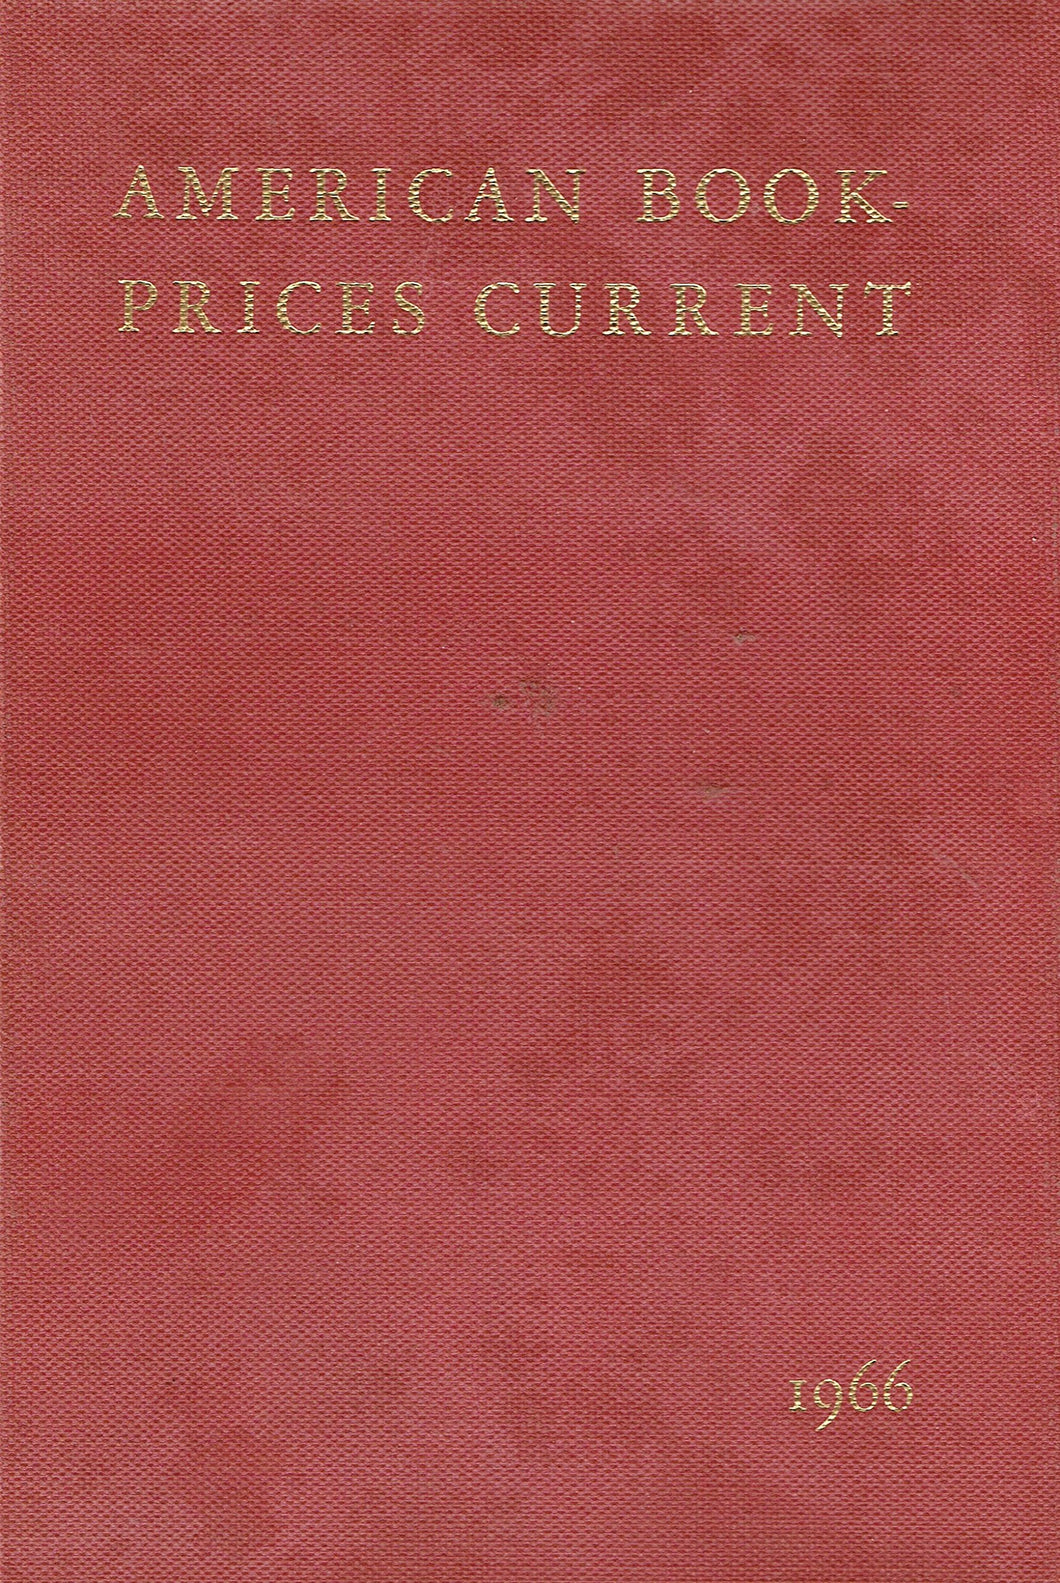 American Book-Prices Current Volume 72, 1966